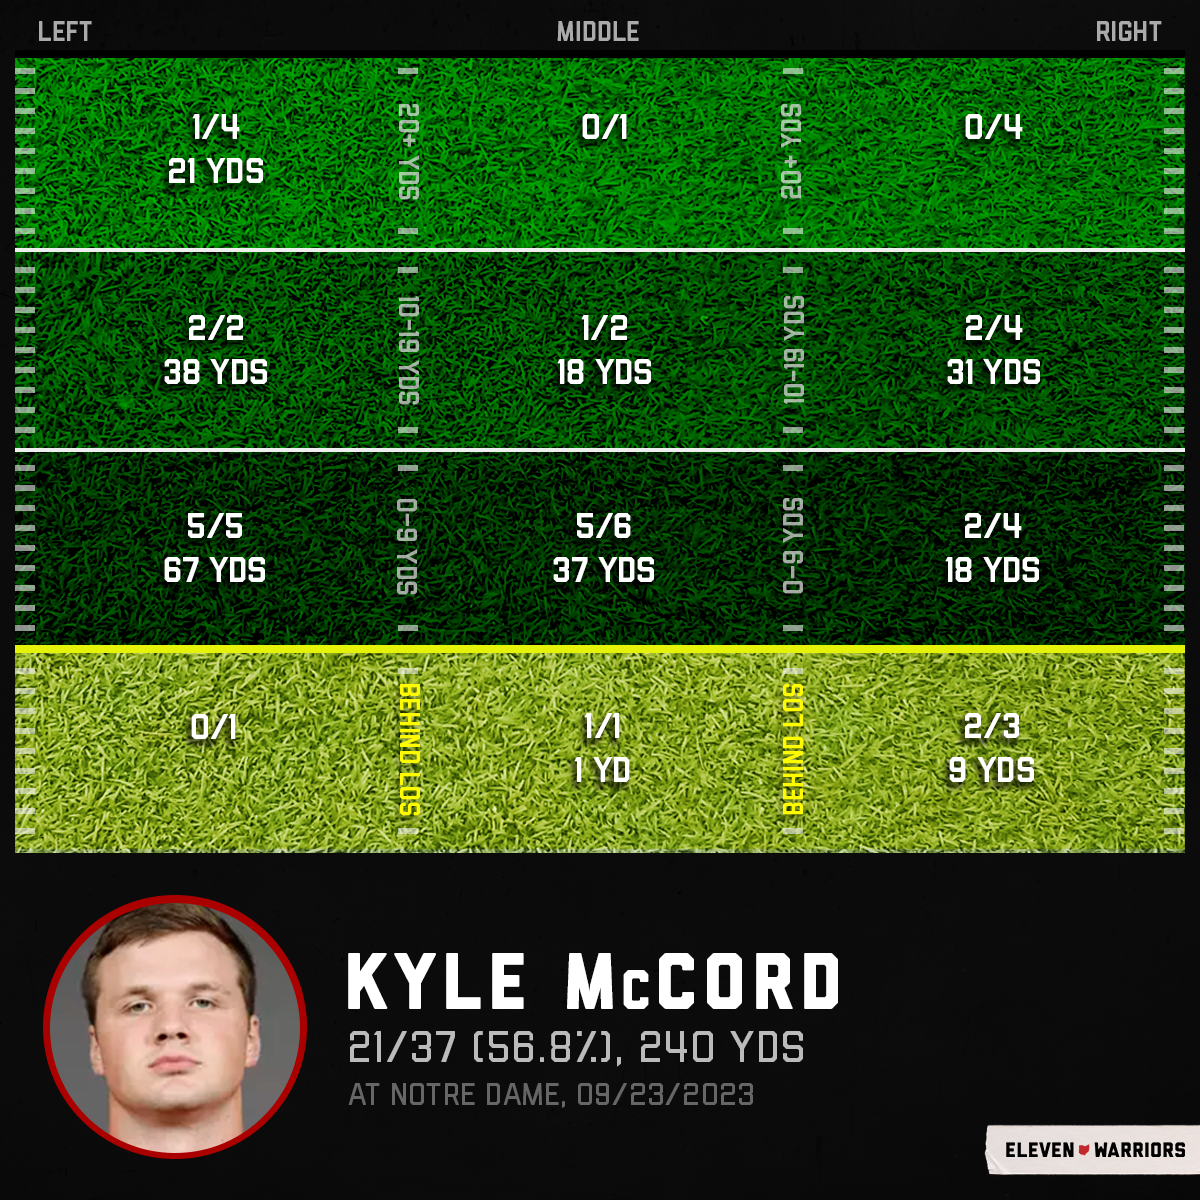 Kyle McCord's passing chart at Notre Dame